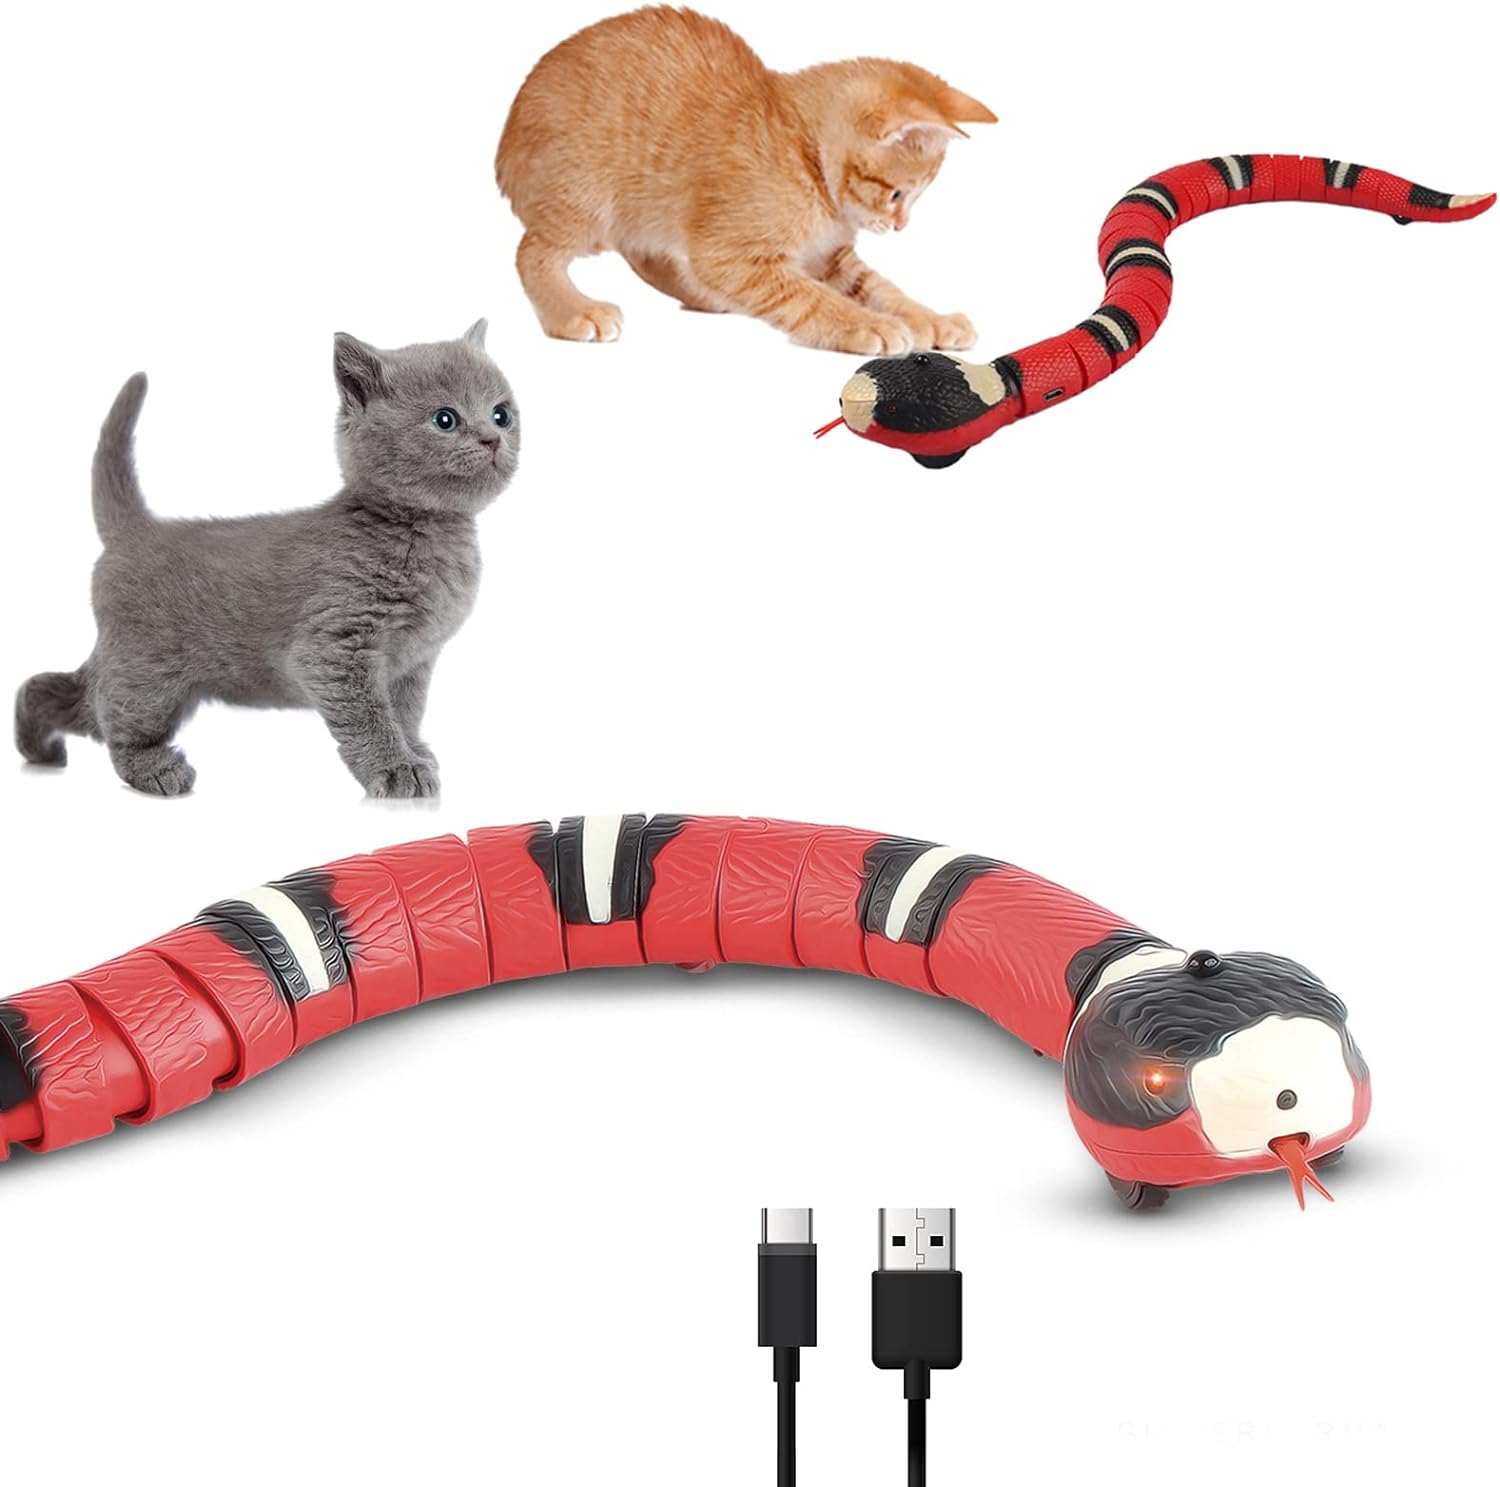 Cat and snake coiled together